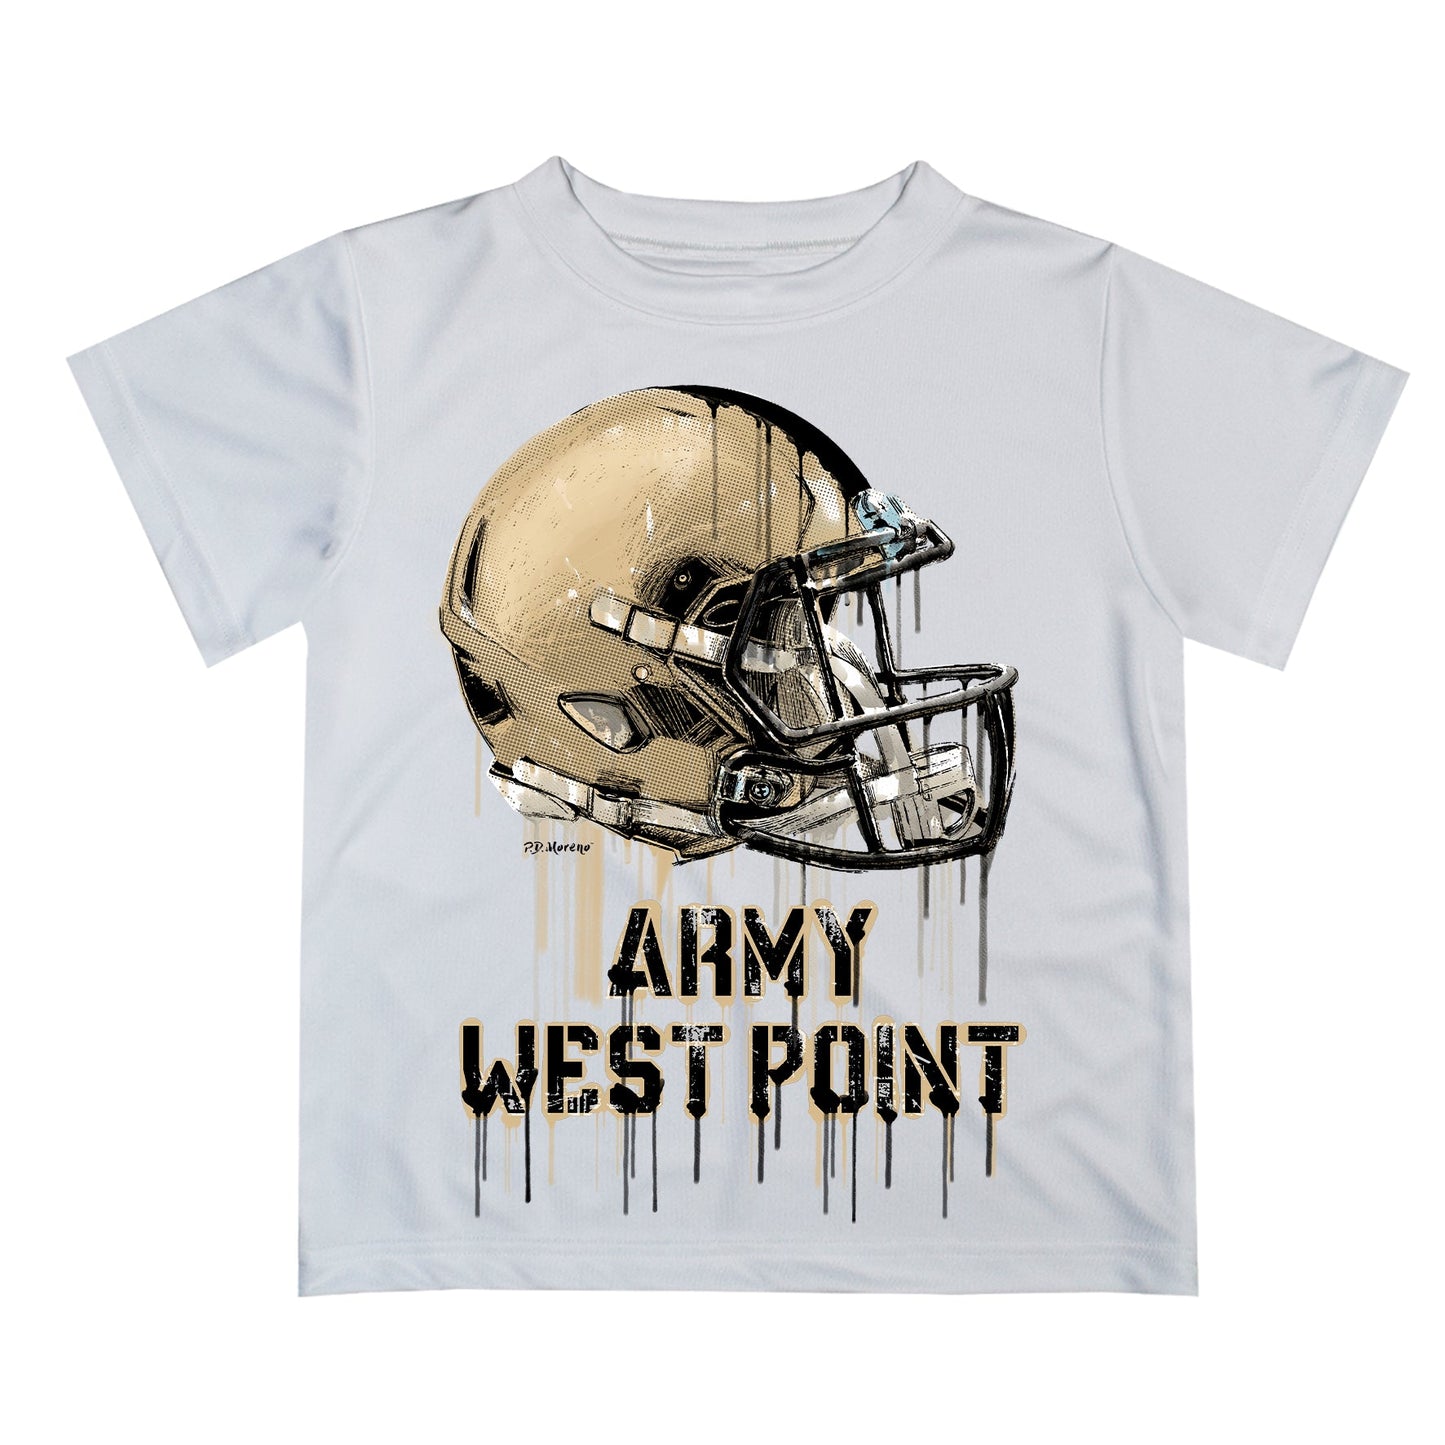 Army West Point Black Knights Original Dripping Football Helmet White T-Shirt by Vive La Fete